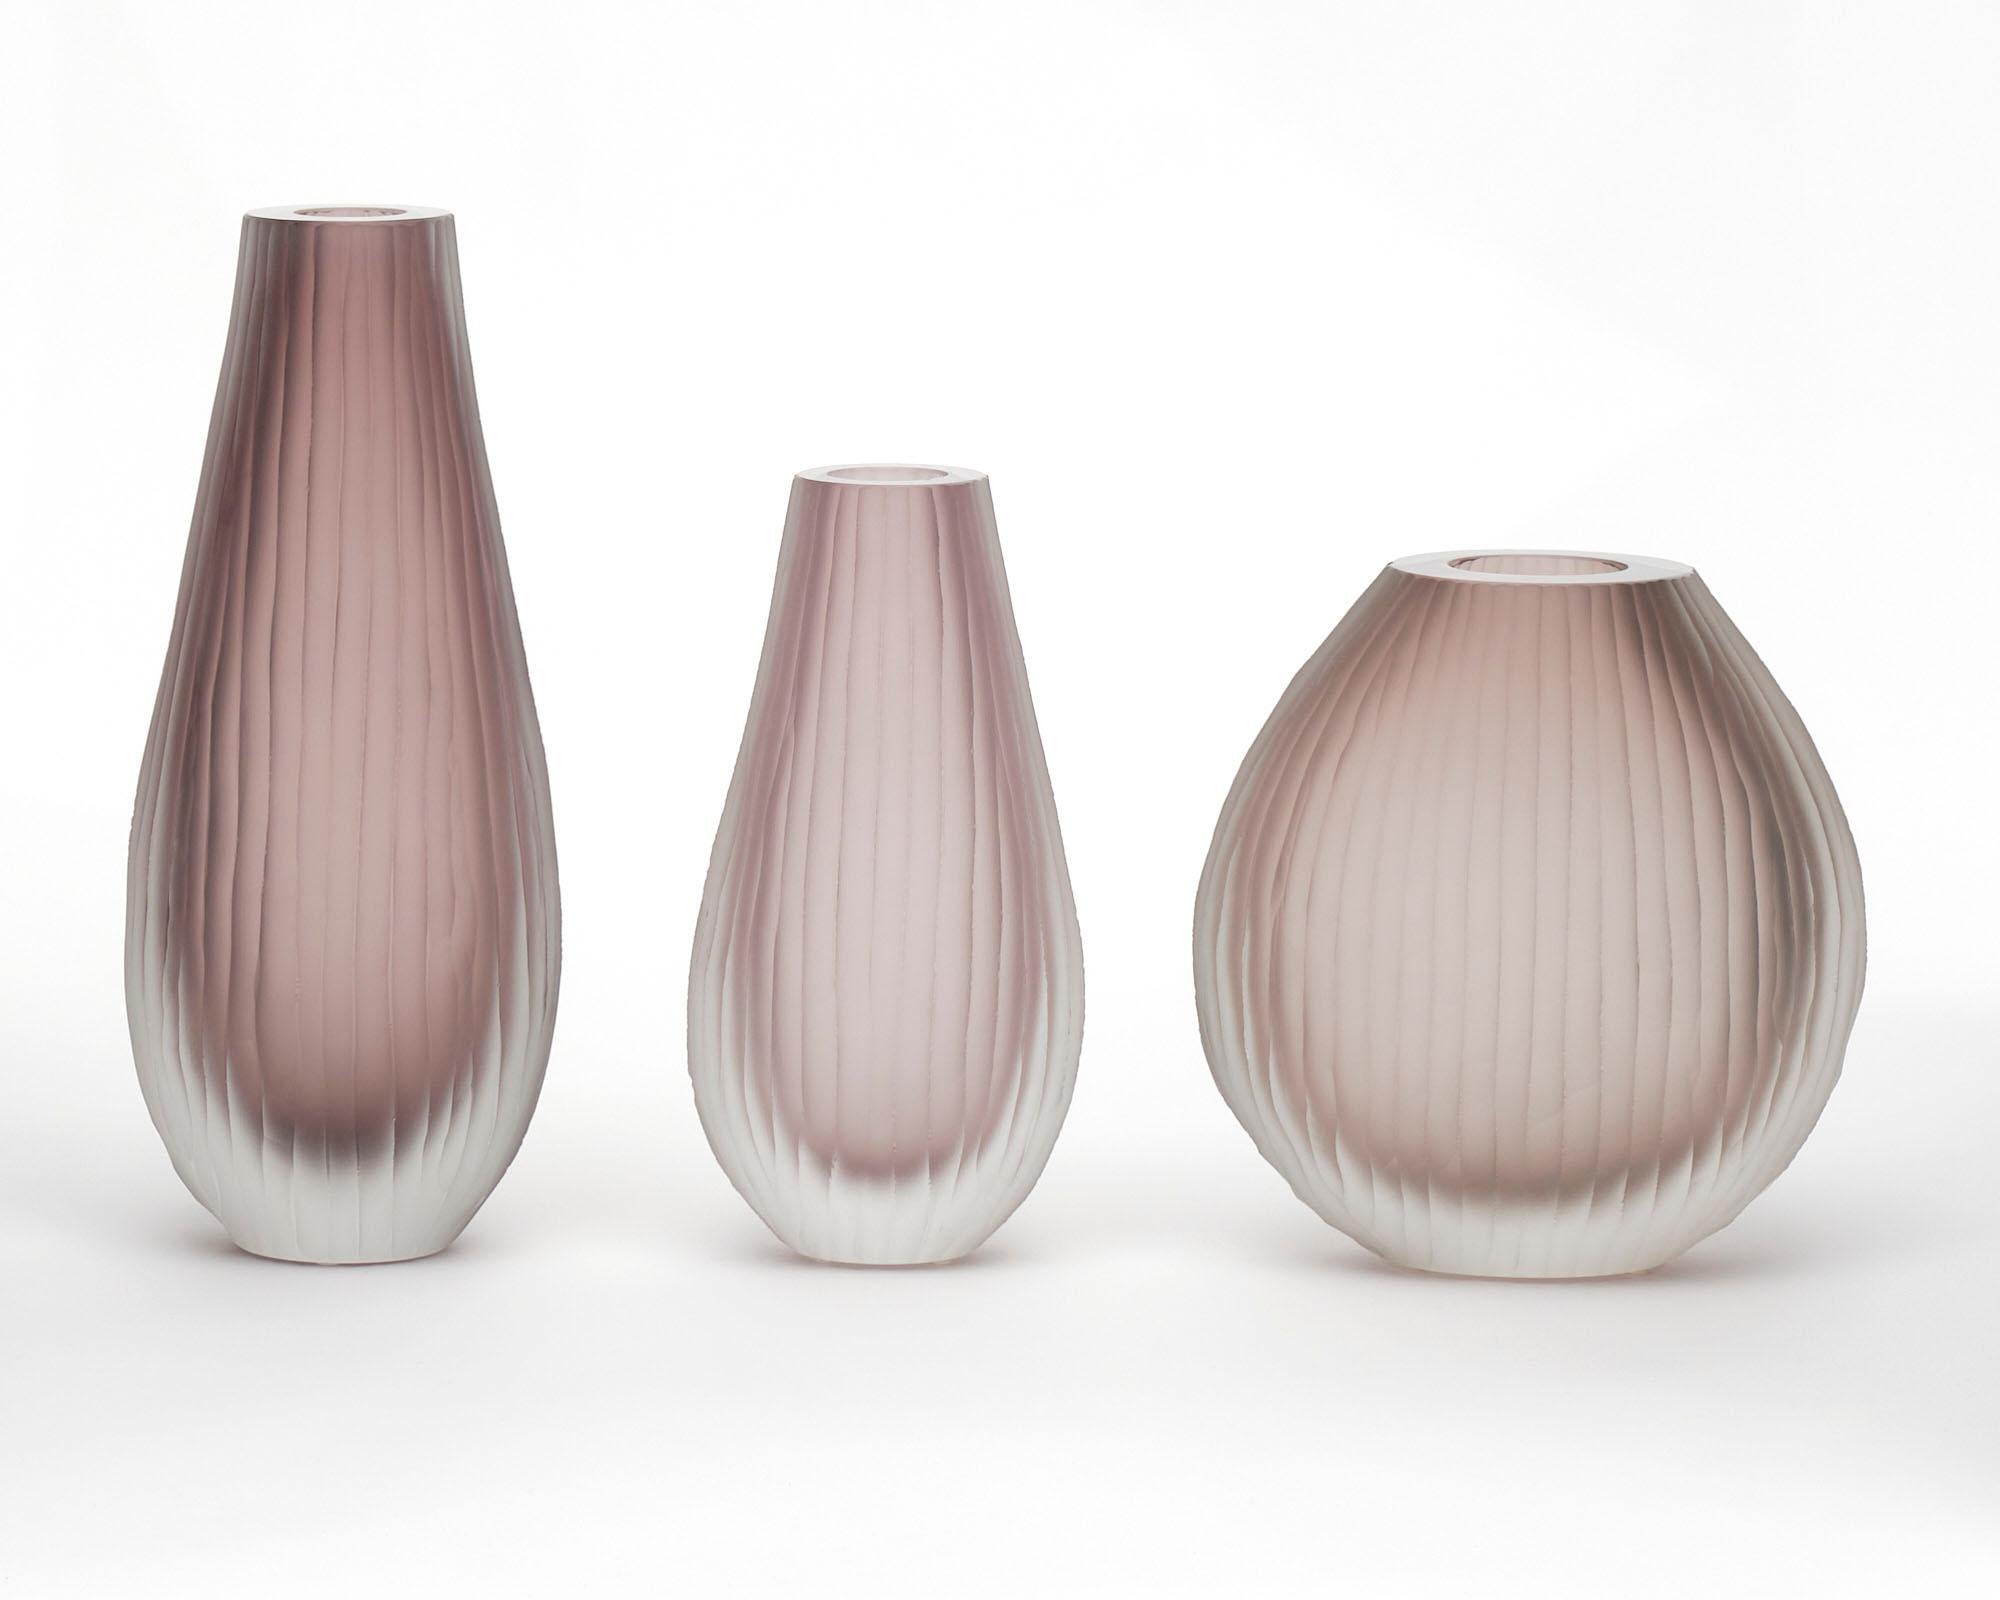 Set of three Murano glass vases in the manner of Tobia Scarpa. The set has been made using the “battuto” or hammered technique. They are in a beautiful amethyst tone. The measurements listed are for the tallest vase. The measurements for all three